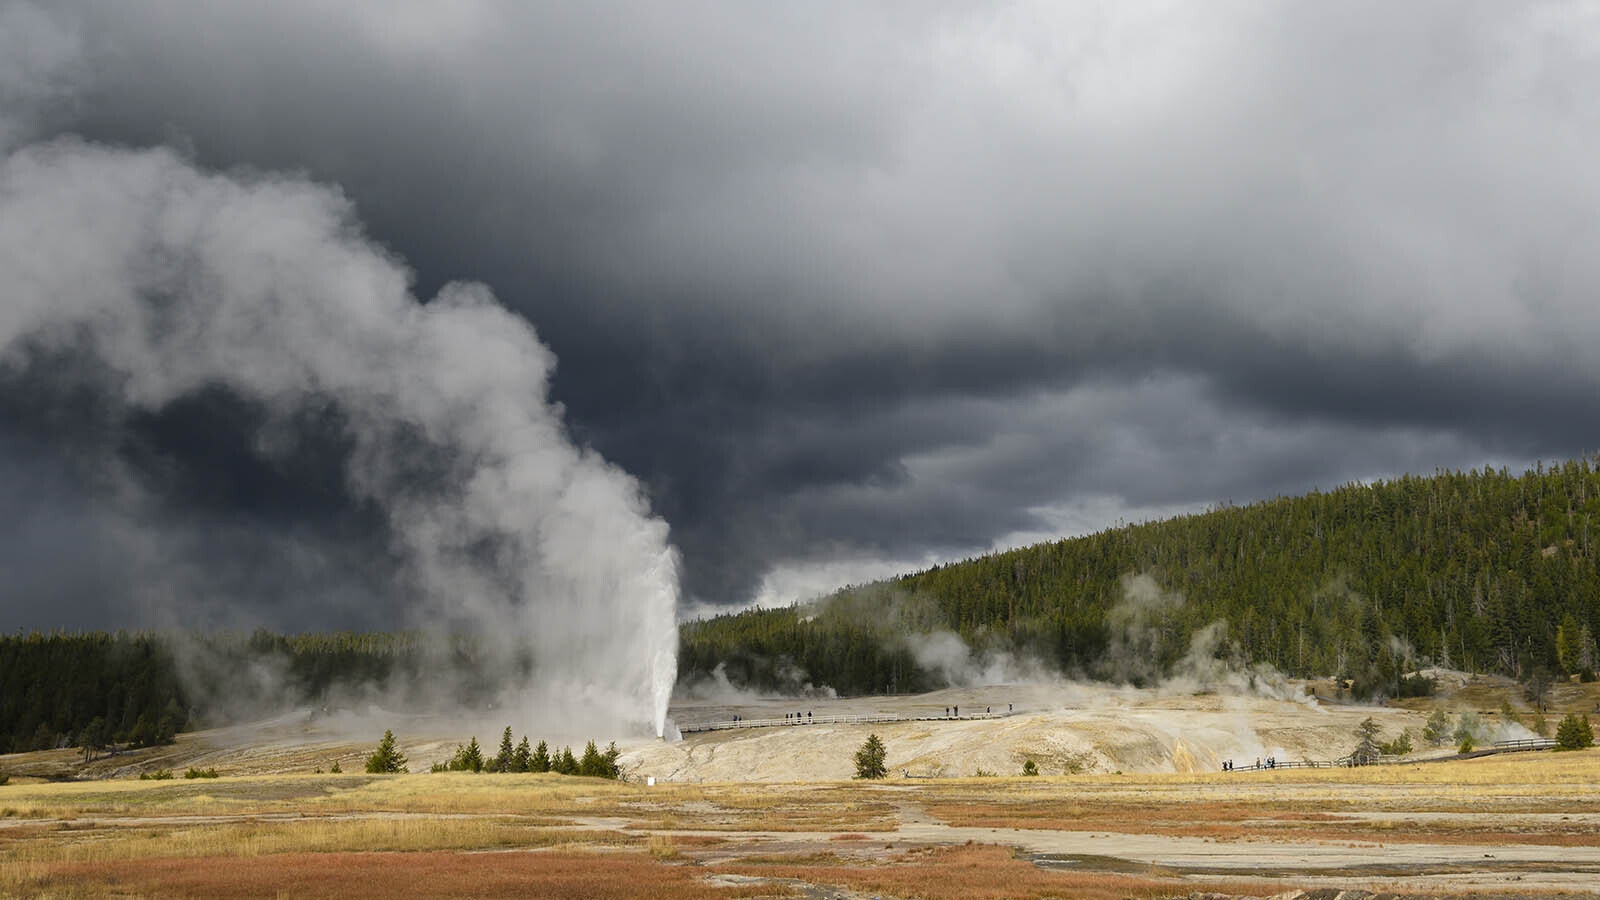 Volcanic activity at Fountain Flats in Yellowstone National Park.